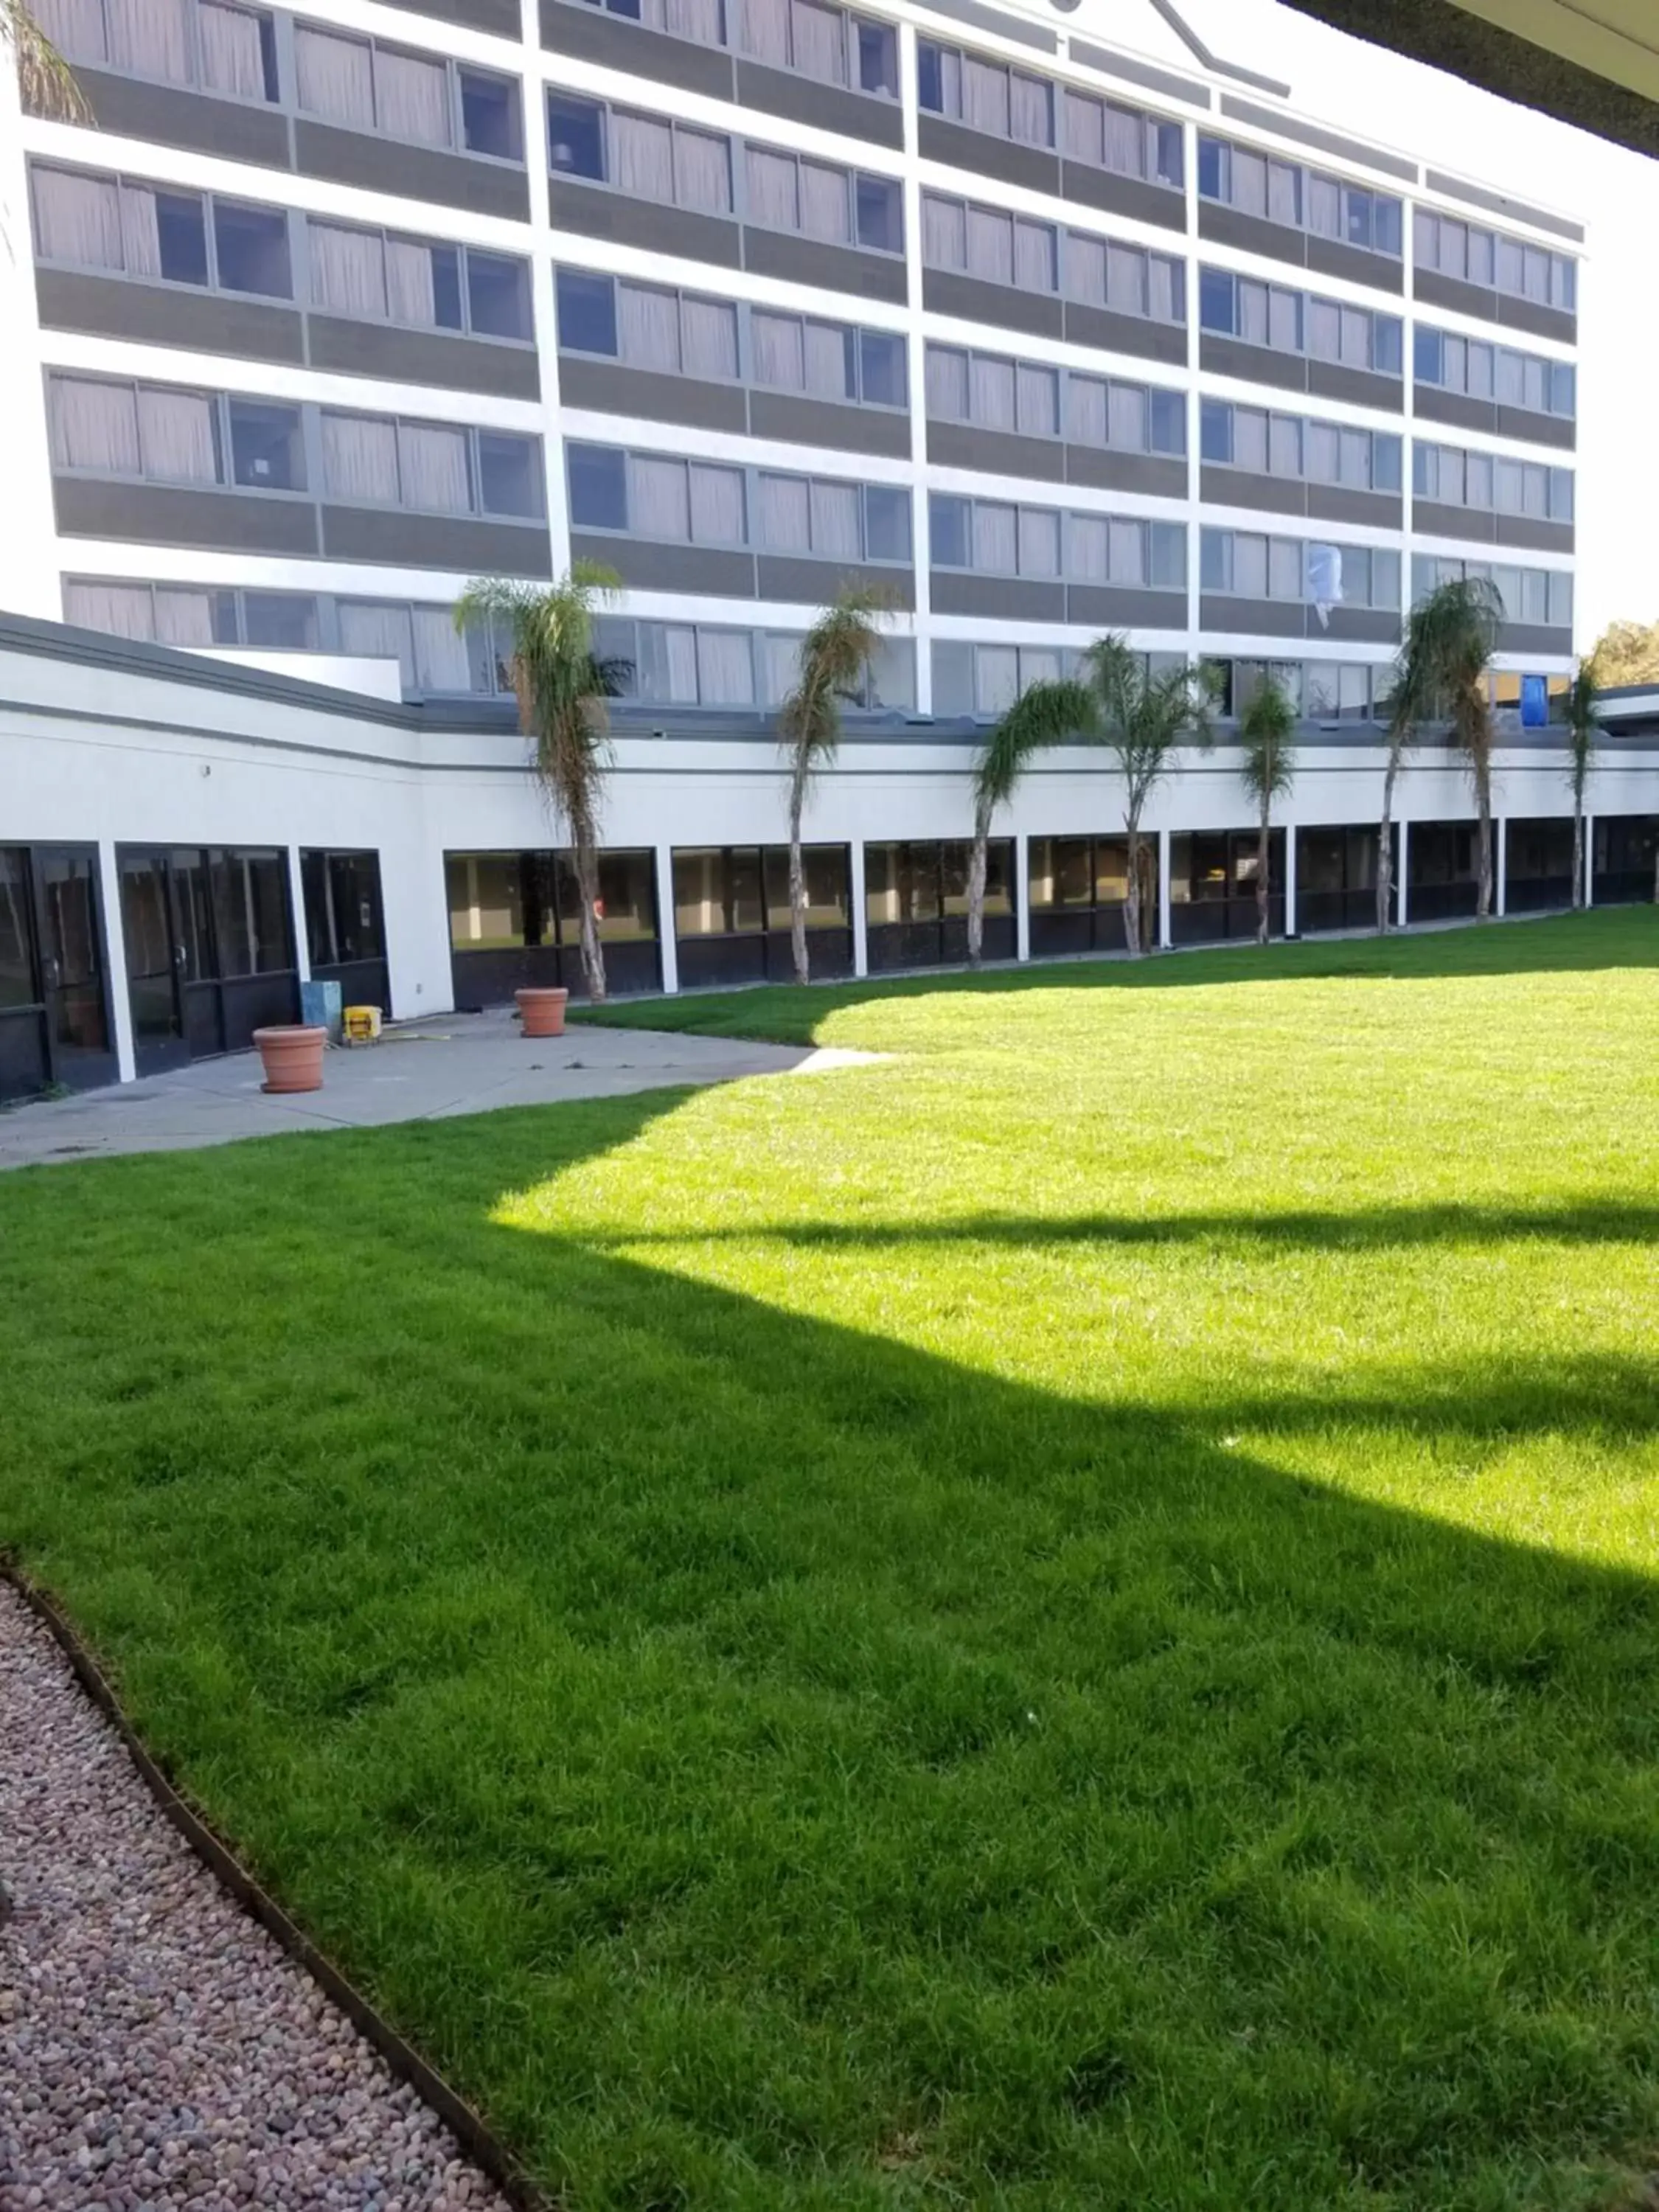 Inner courtyard view, Property Building in Radisson Hotel Oakland Airport